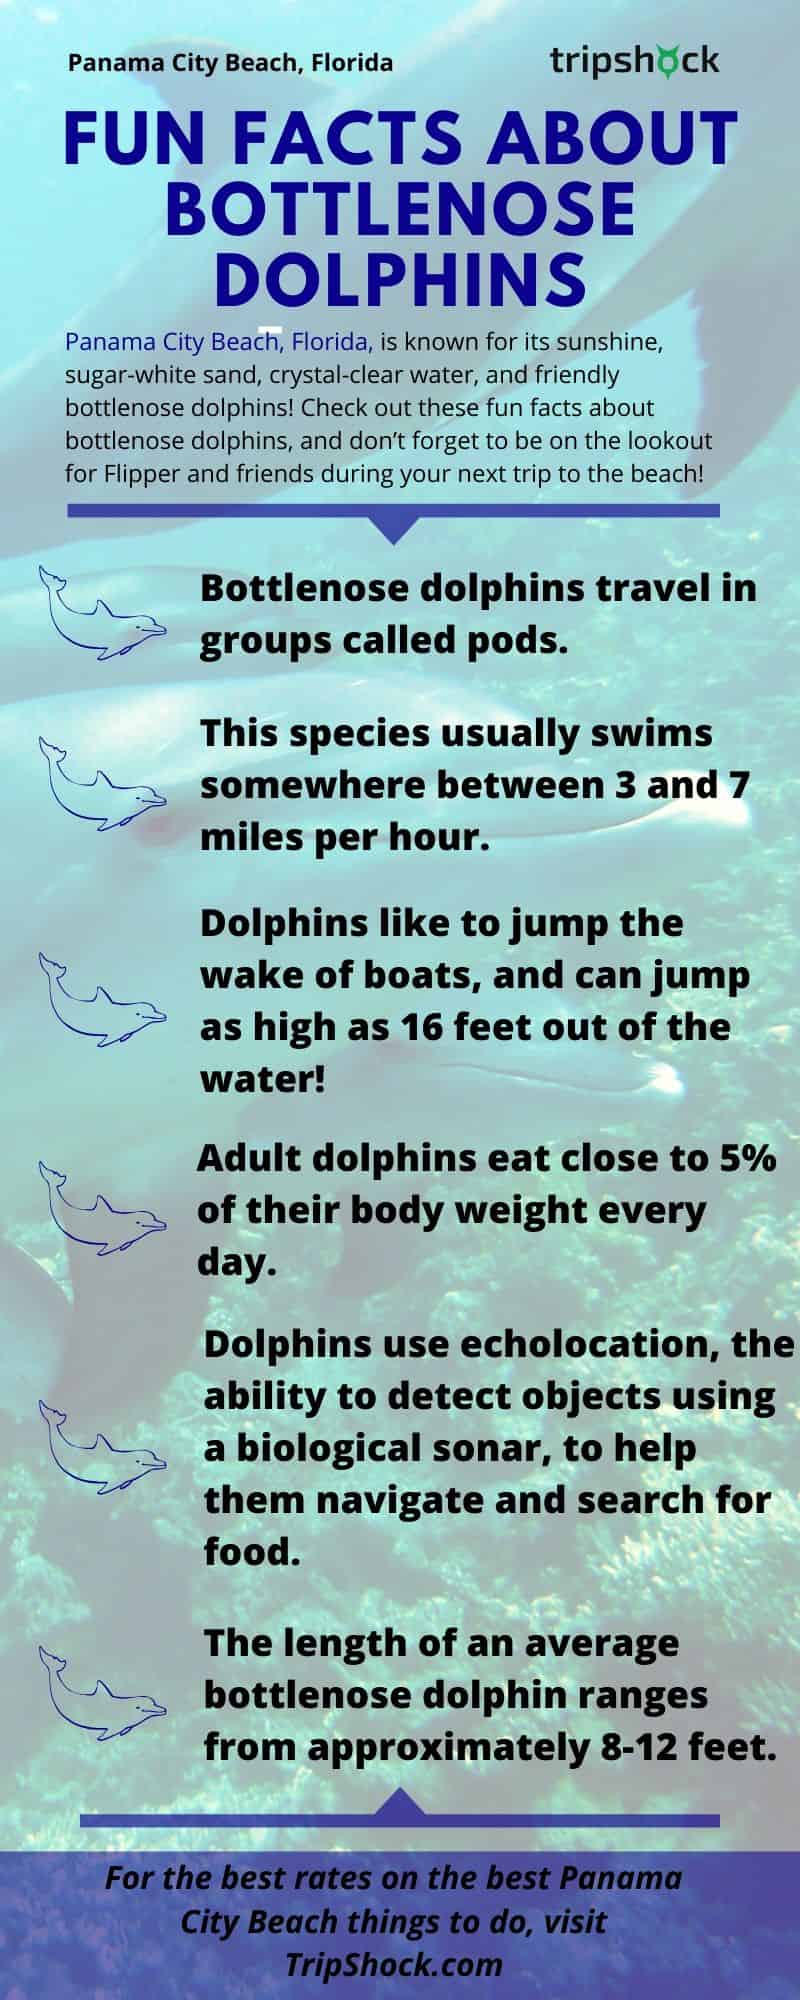 Fun Facts About Bottlenose Dolphins